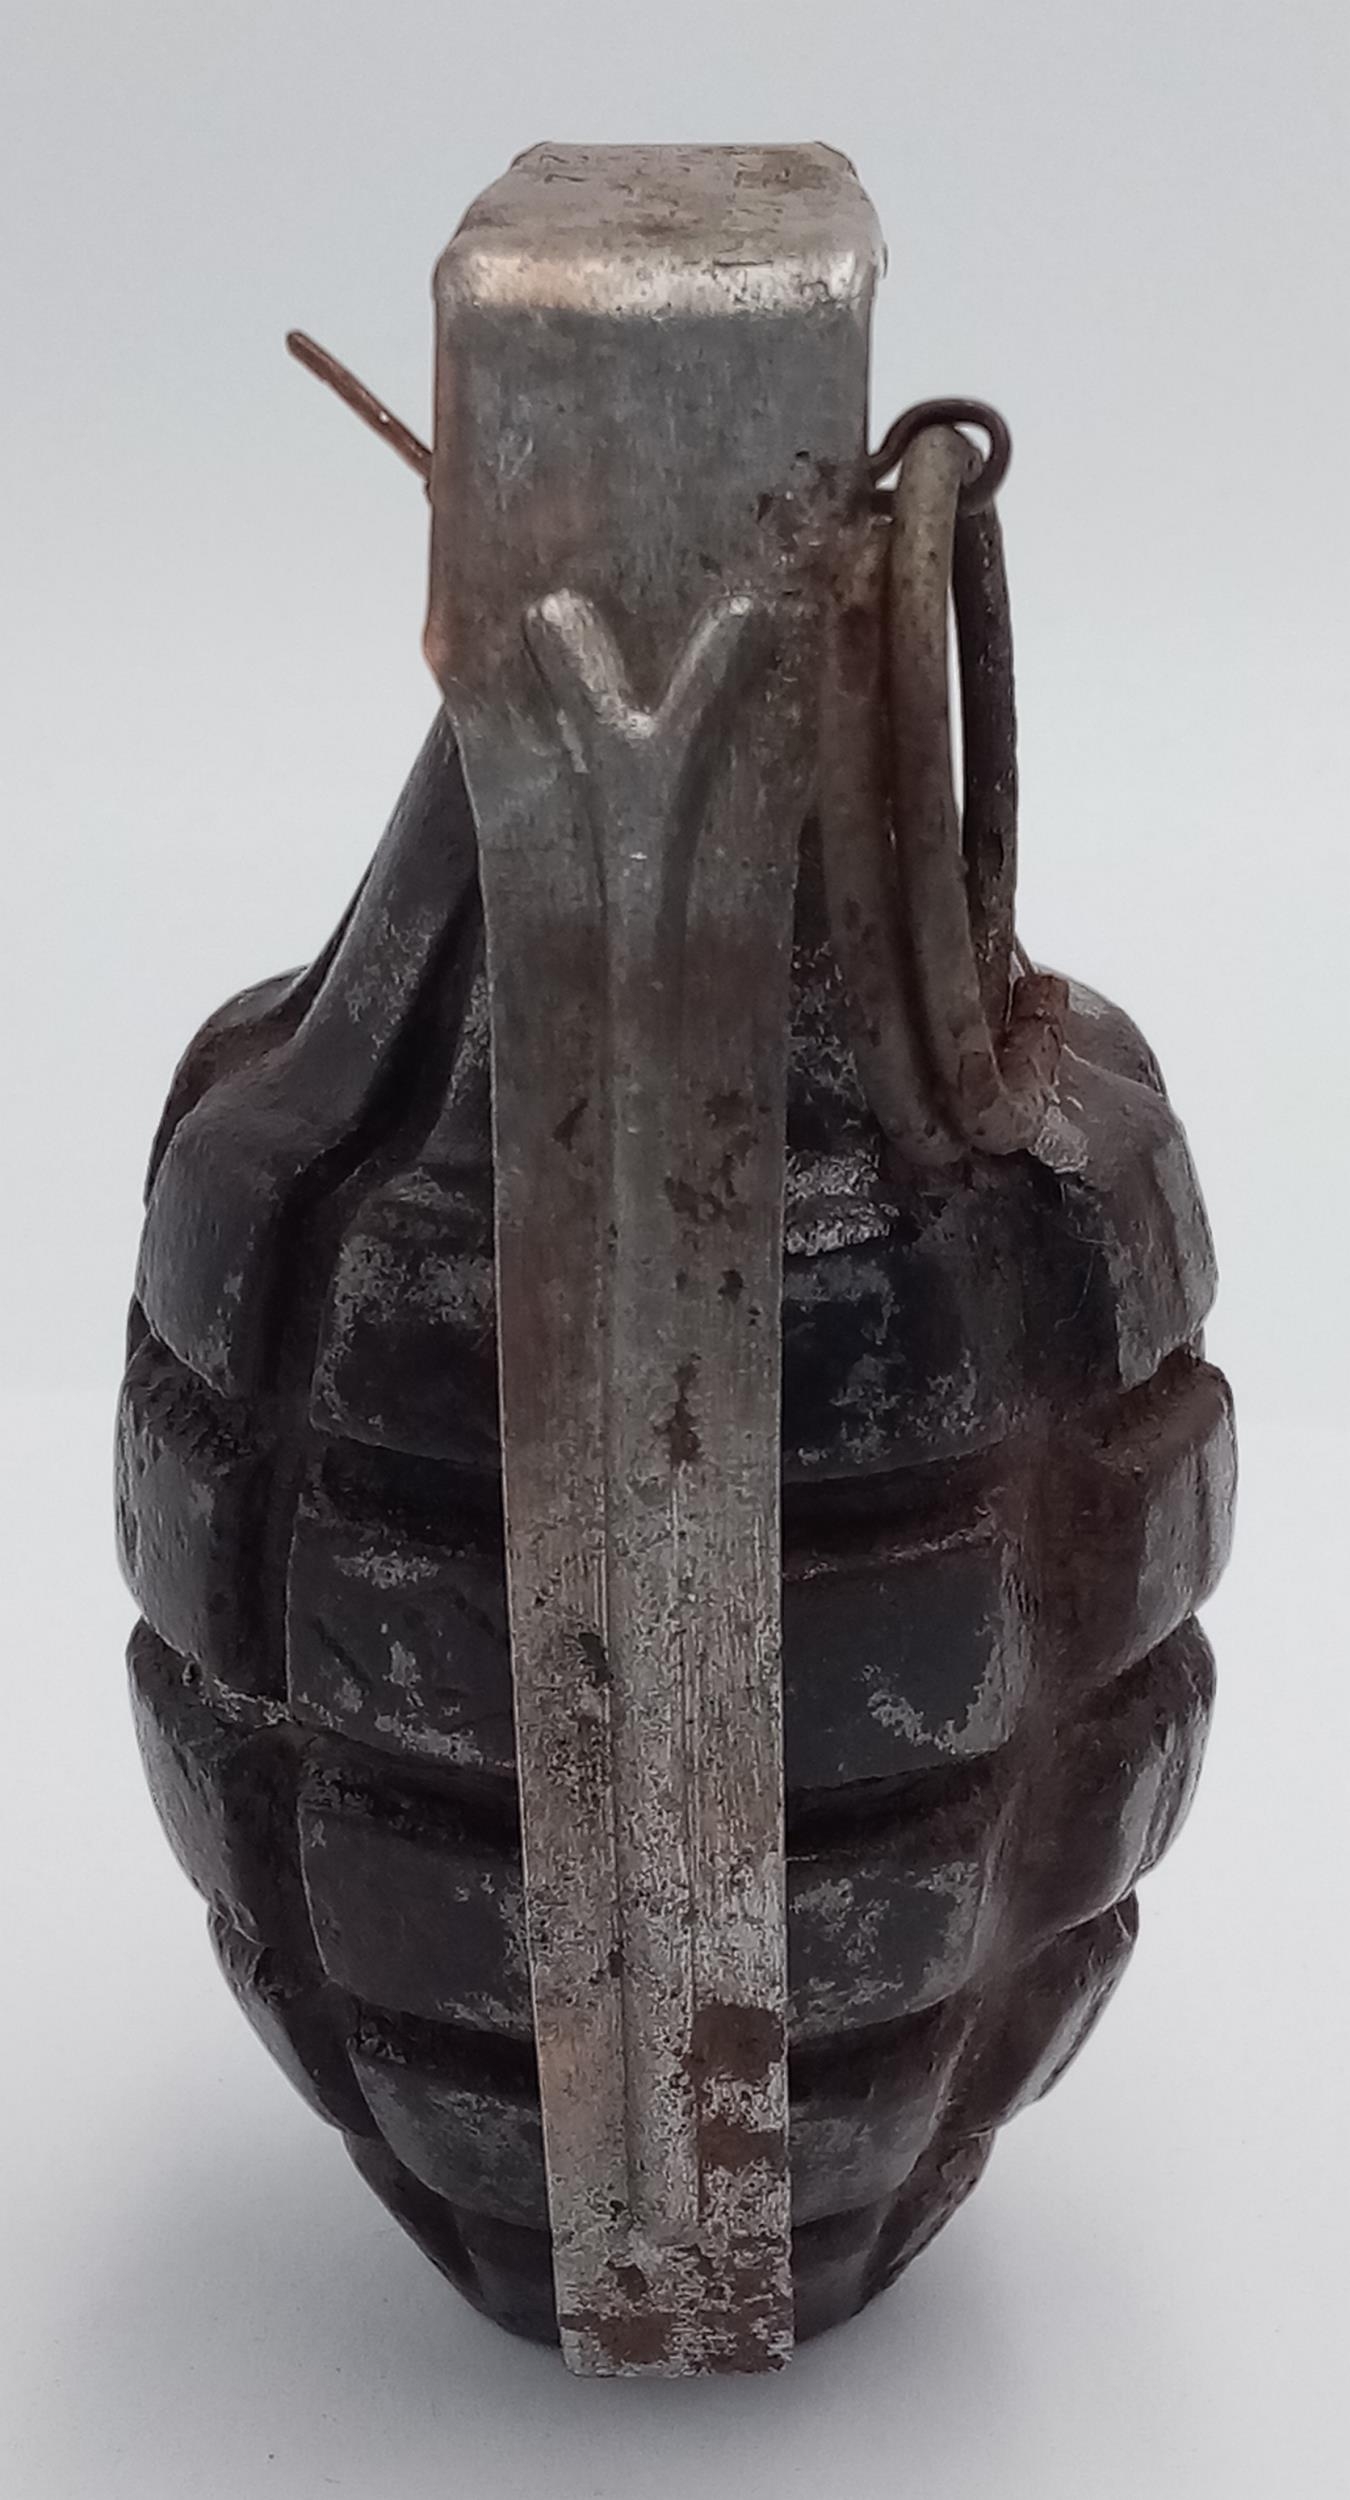 INERT WW2 Normandy Relic US Pineapple Grenade. This Grenade is one of several that were found in the - Image 3 of 5